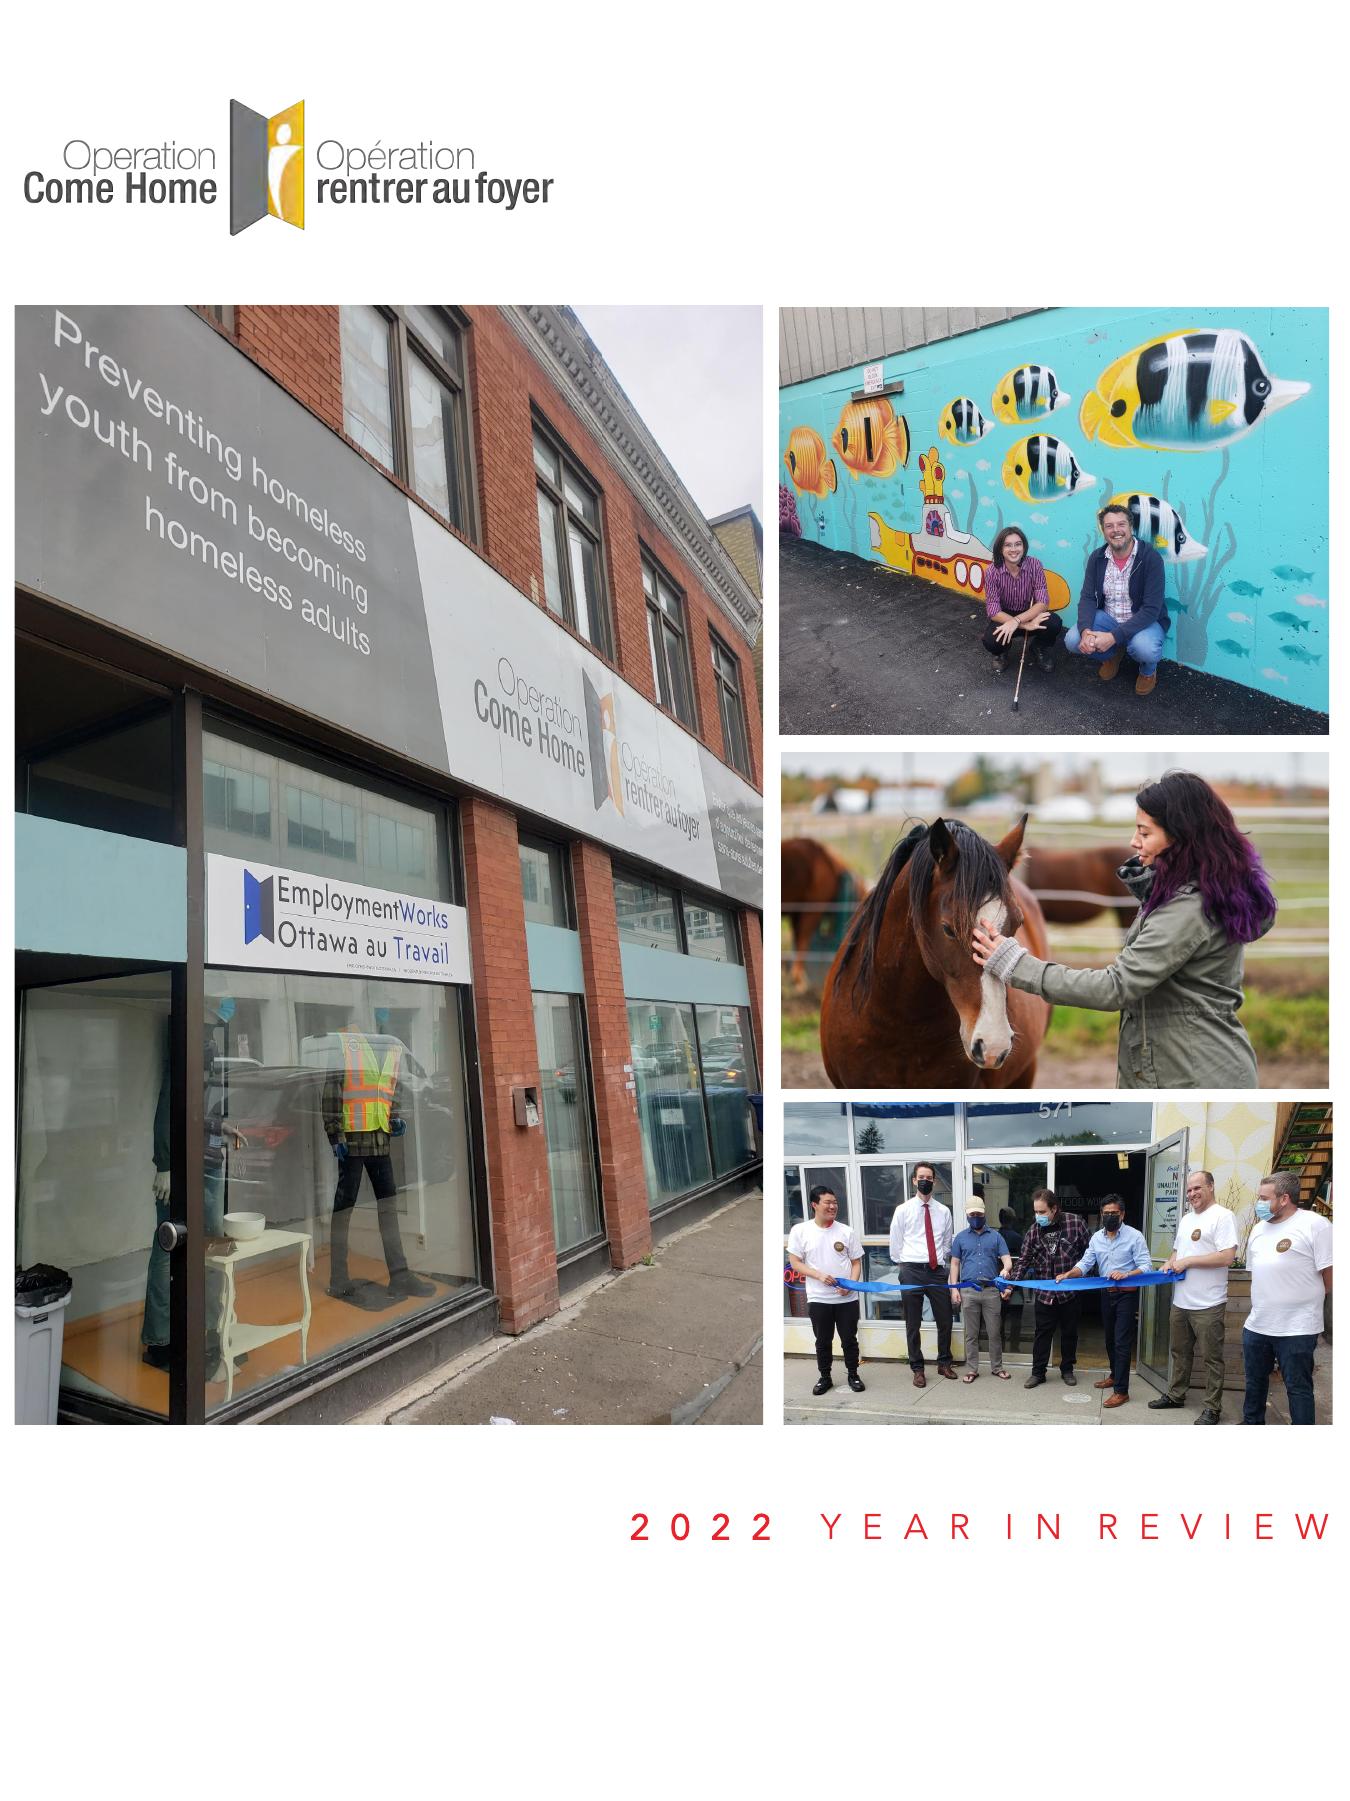 OPERATIONCOMEHOME 2023 Annual Report